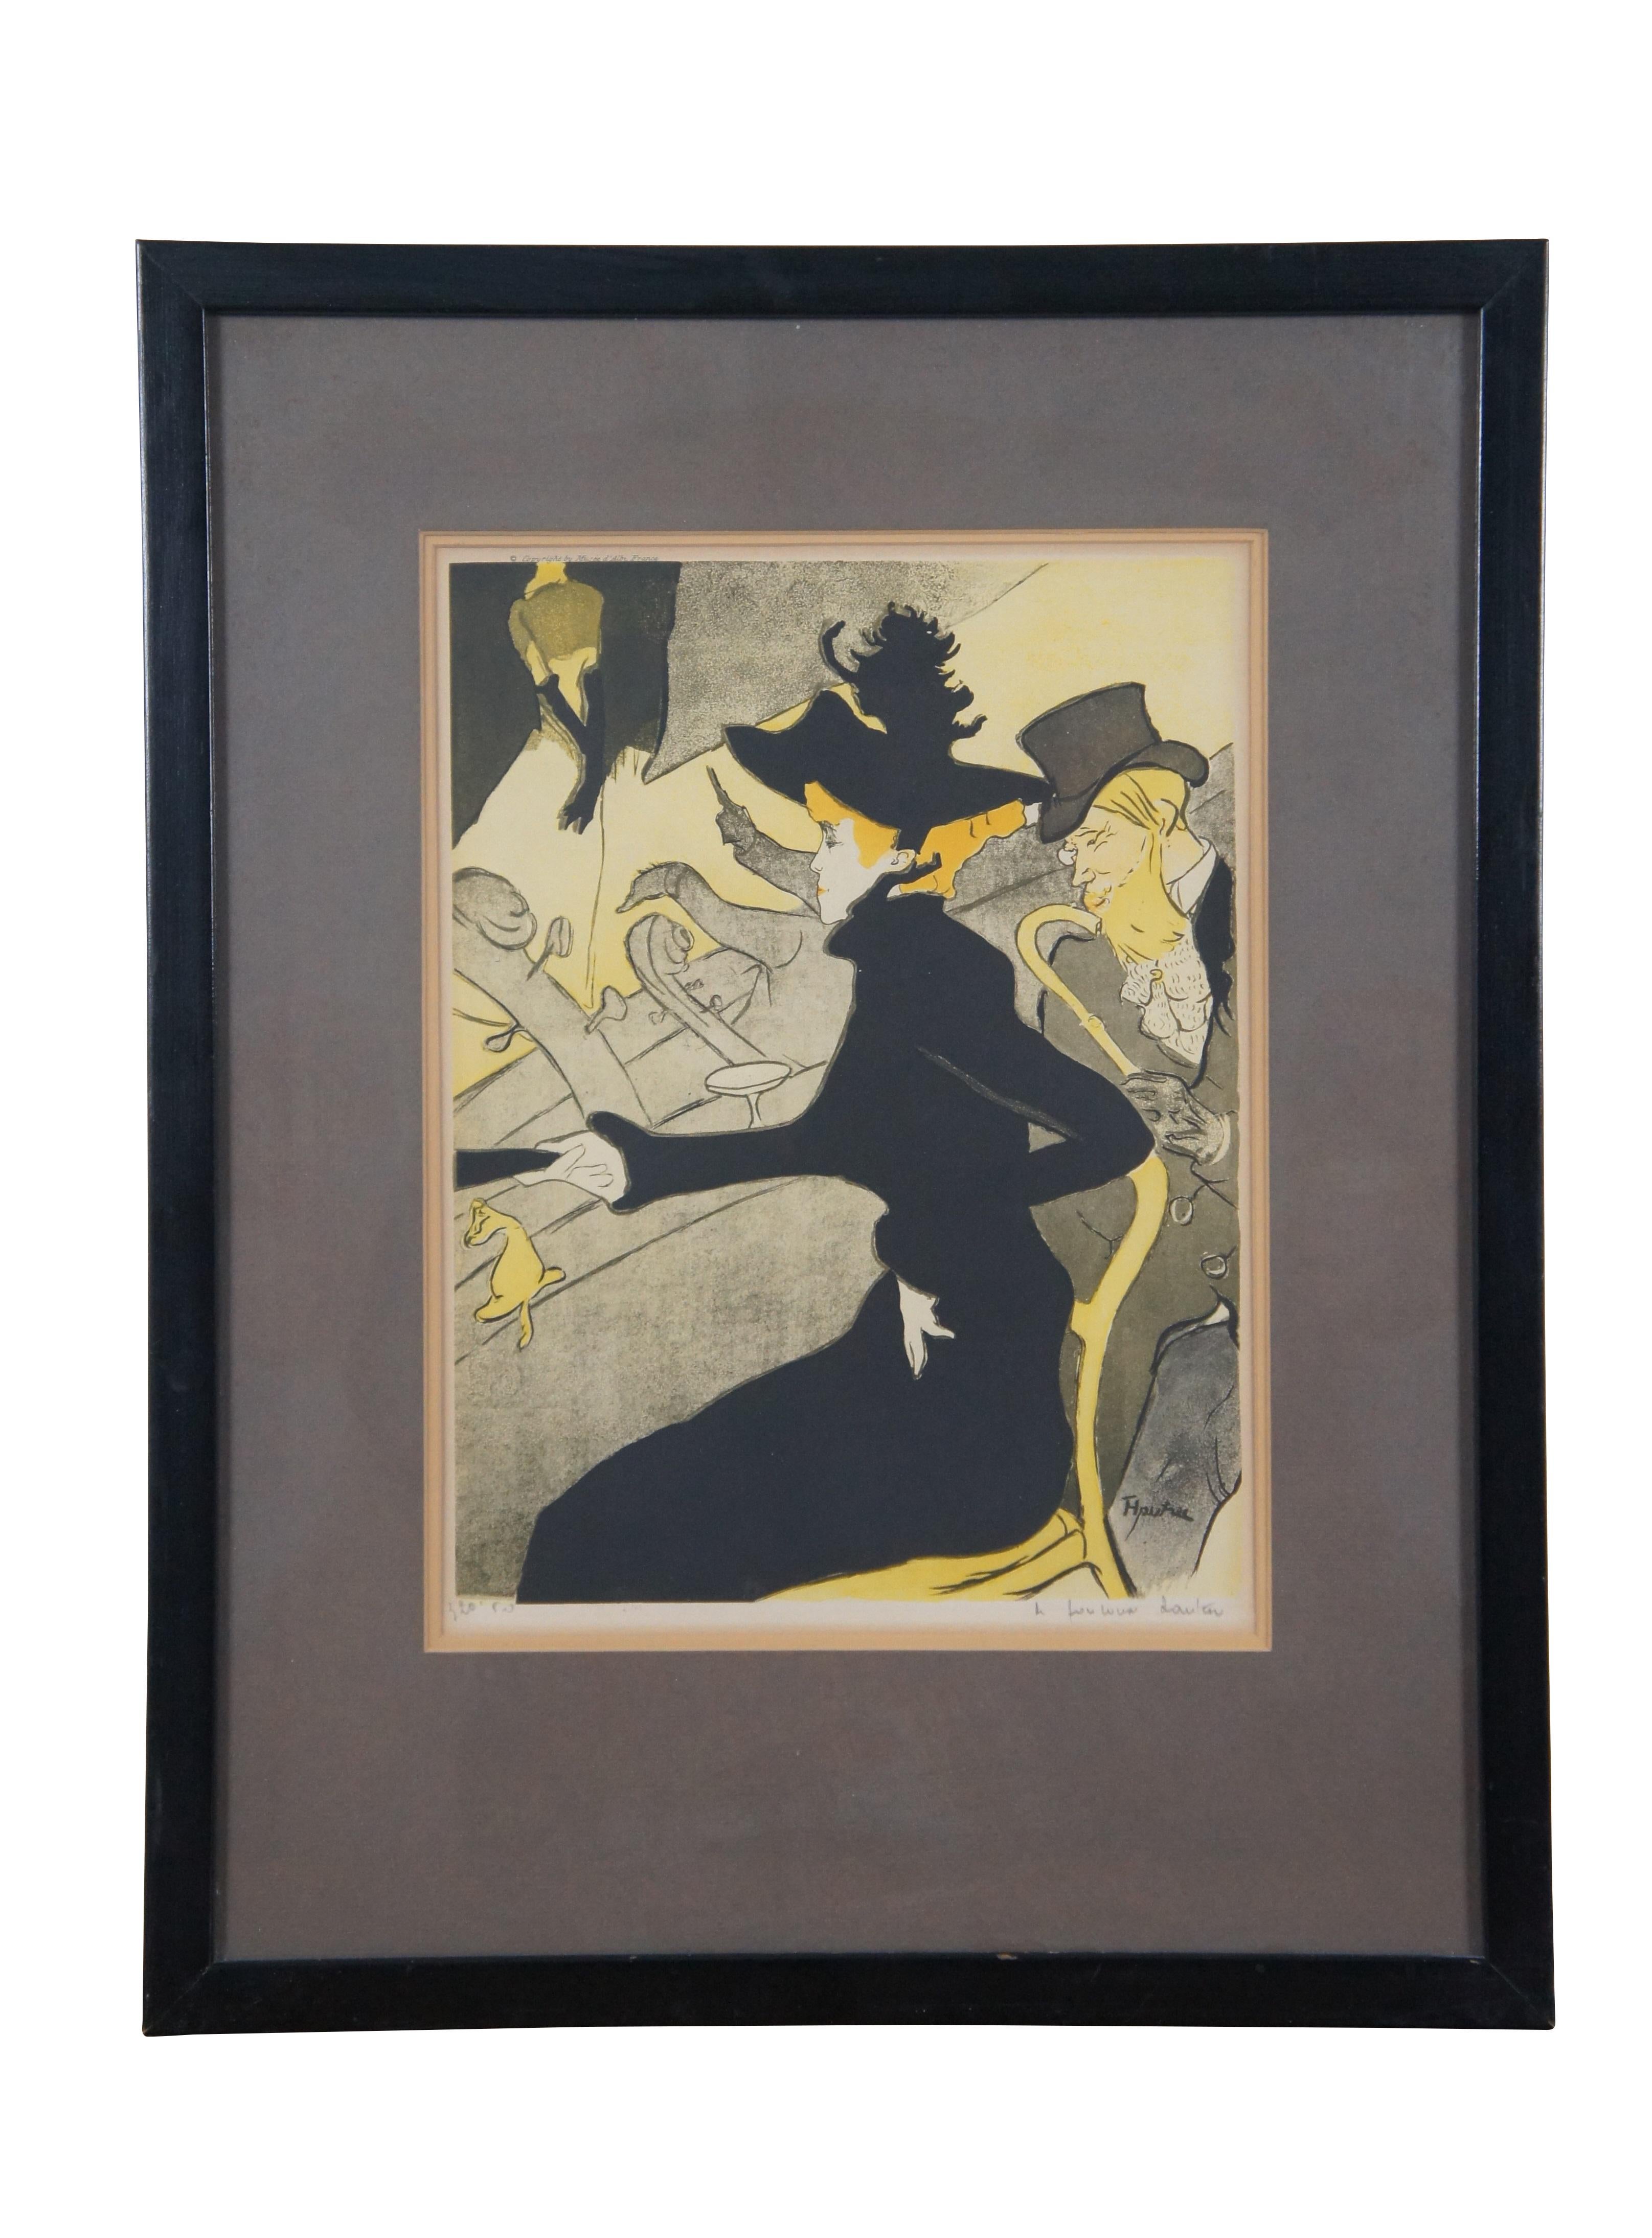 Pair of rare antique French Henri de Toulouse Lautrec Musee d'Albi museum lithograph prints.

Divan Japonais - Originally created in 1892 to advertise a café-chantant that was at the time known as Divan Japonais. The poster depicts three persons